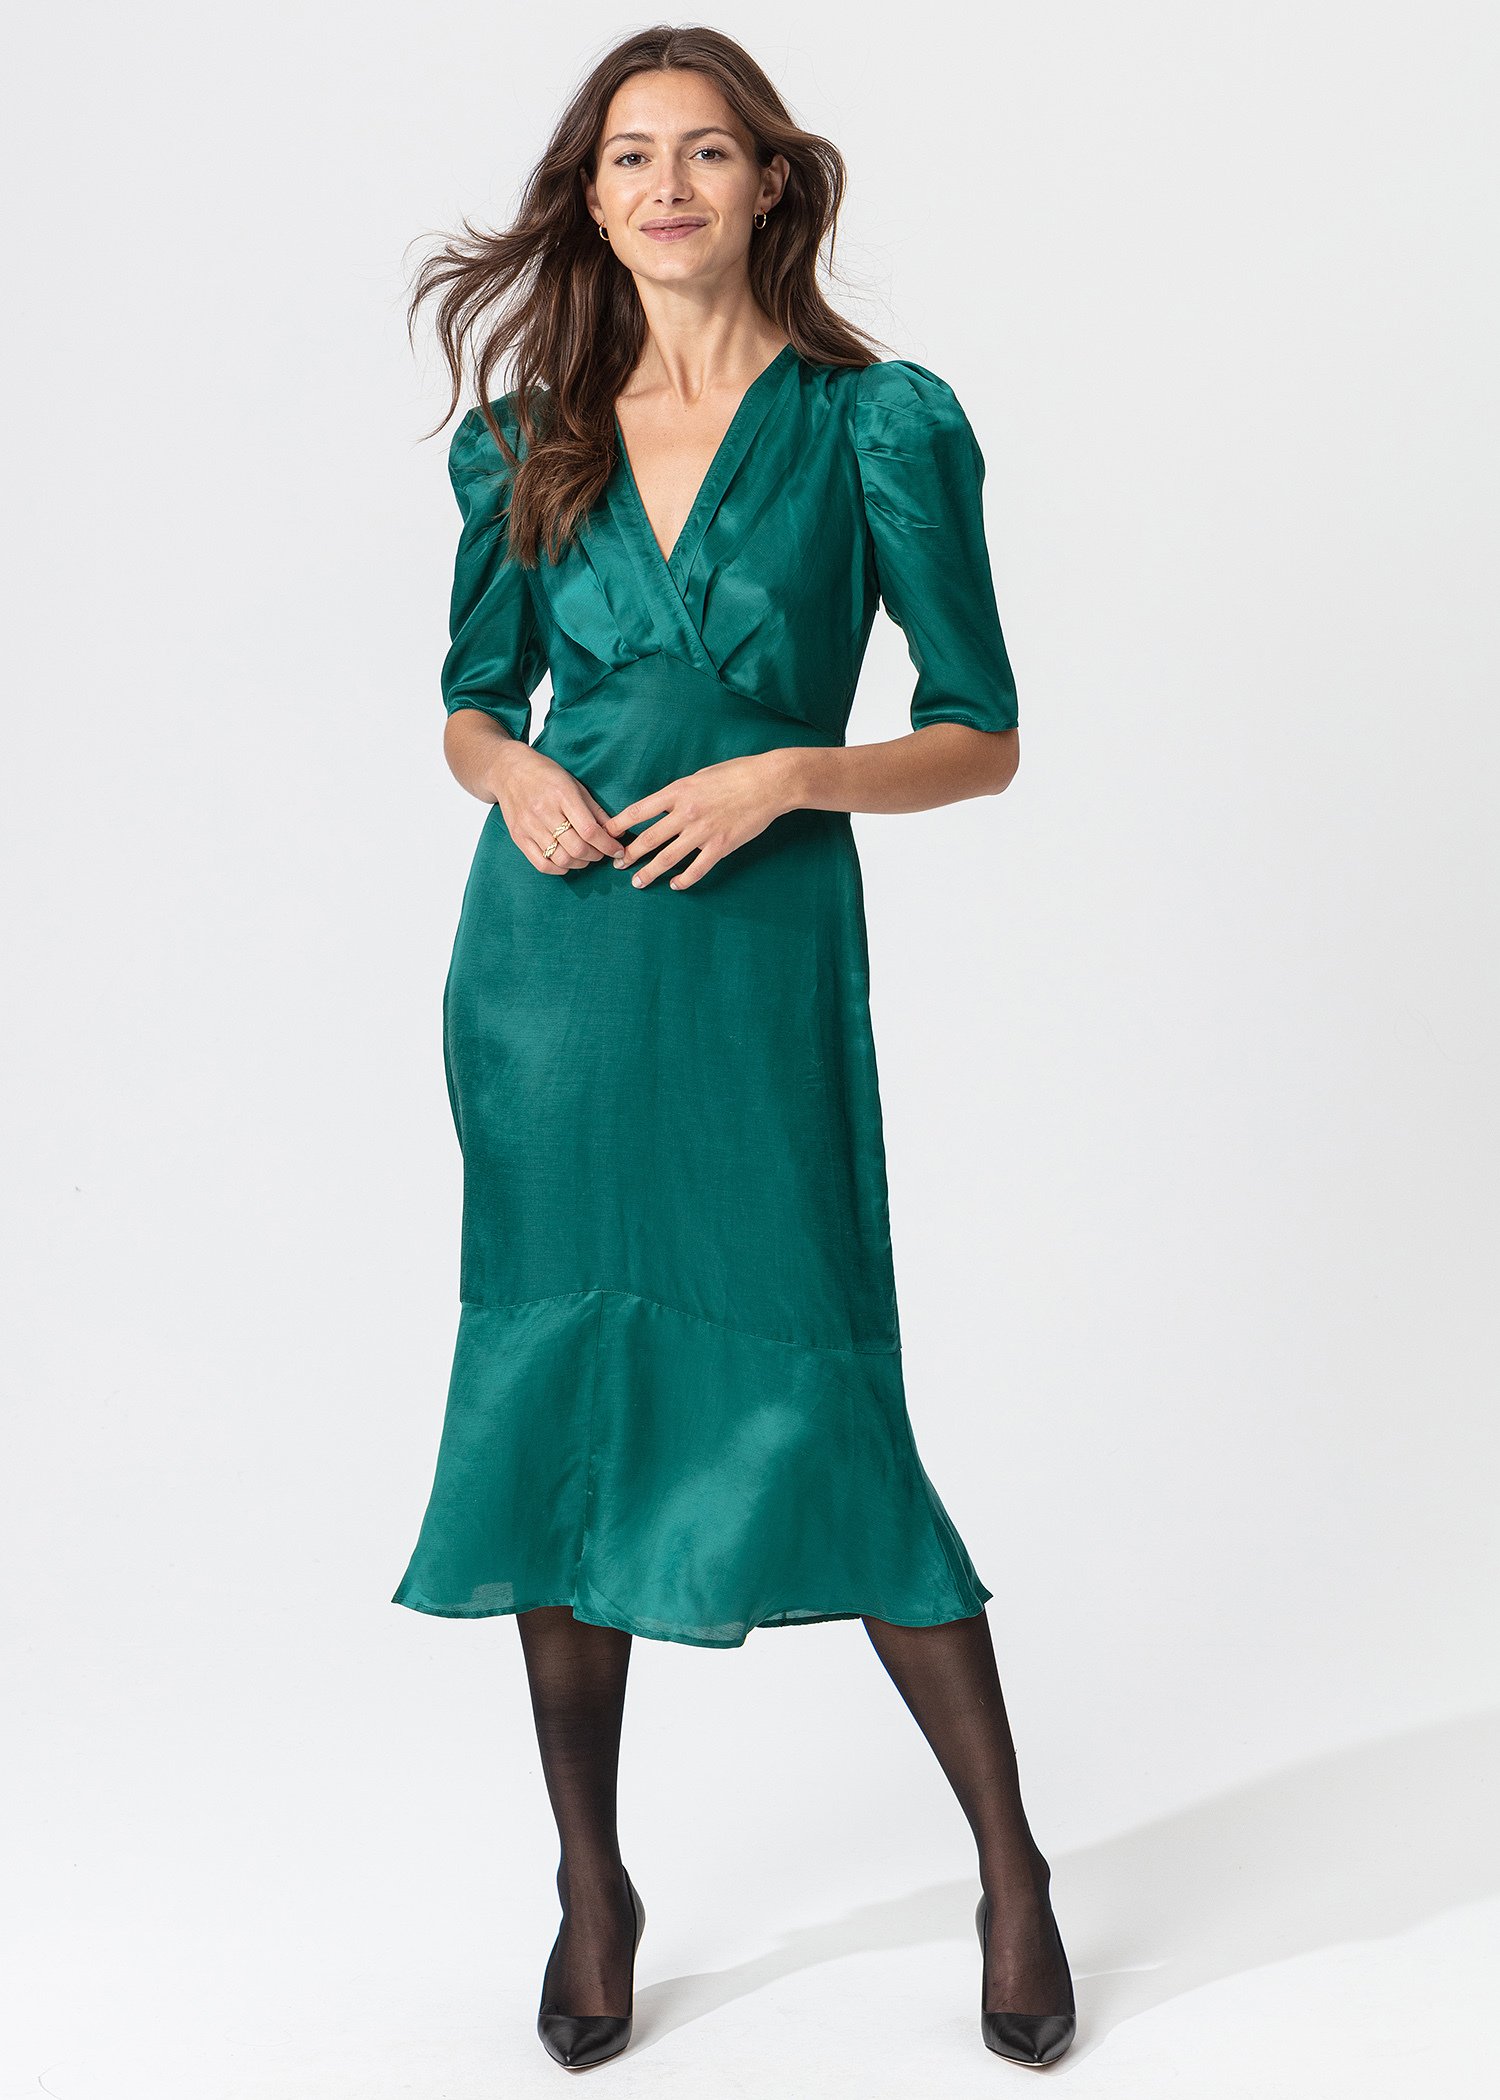 Green dress with puff sleeves Image 2